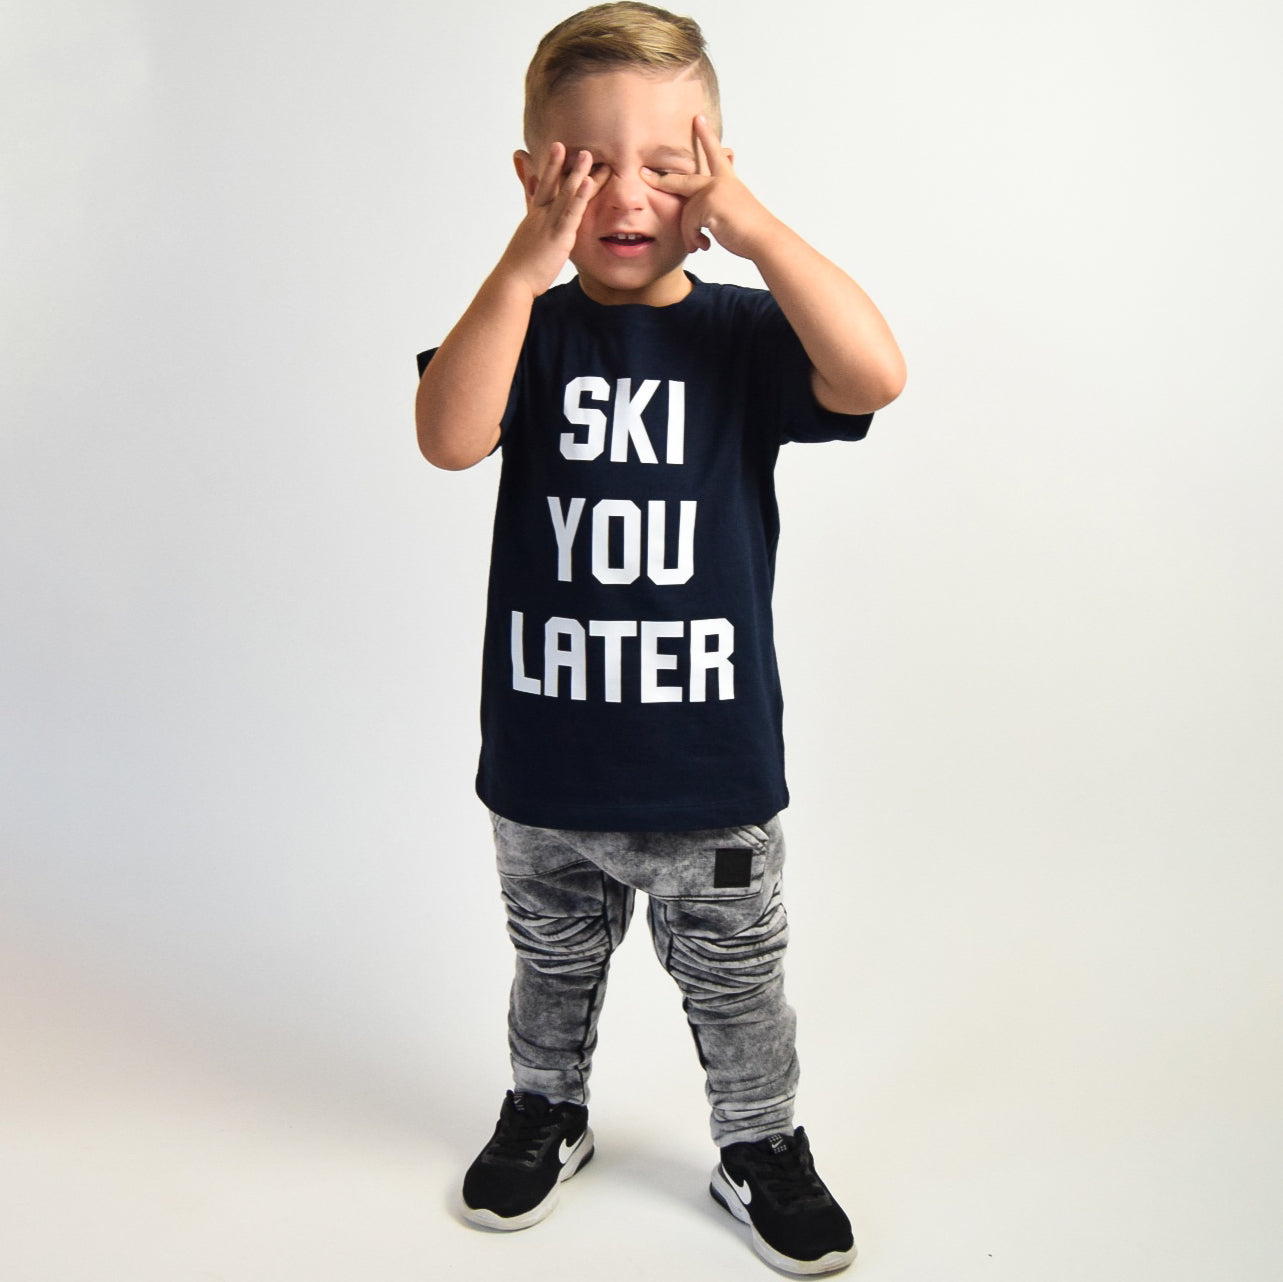 Boy wearing navy shirt with 'Ski you later' print by KMLeon, holding hands before eyes.